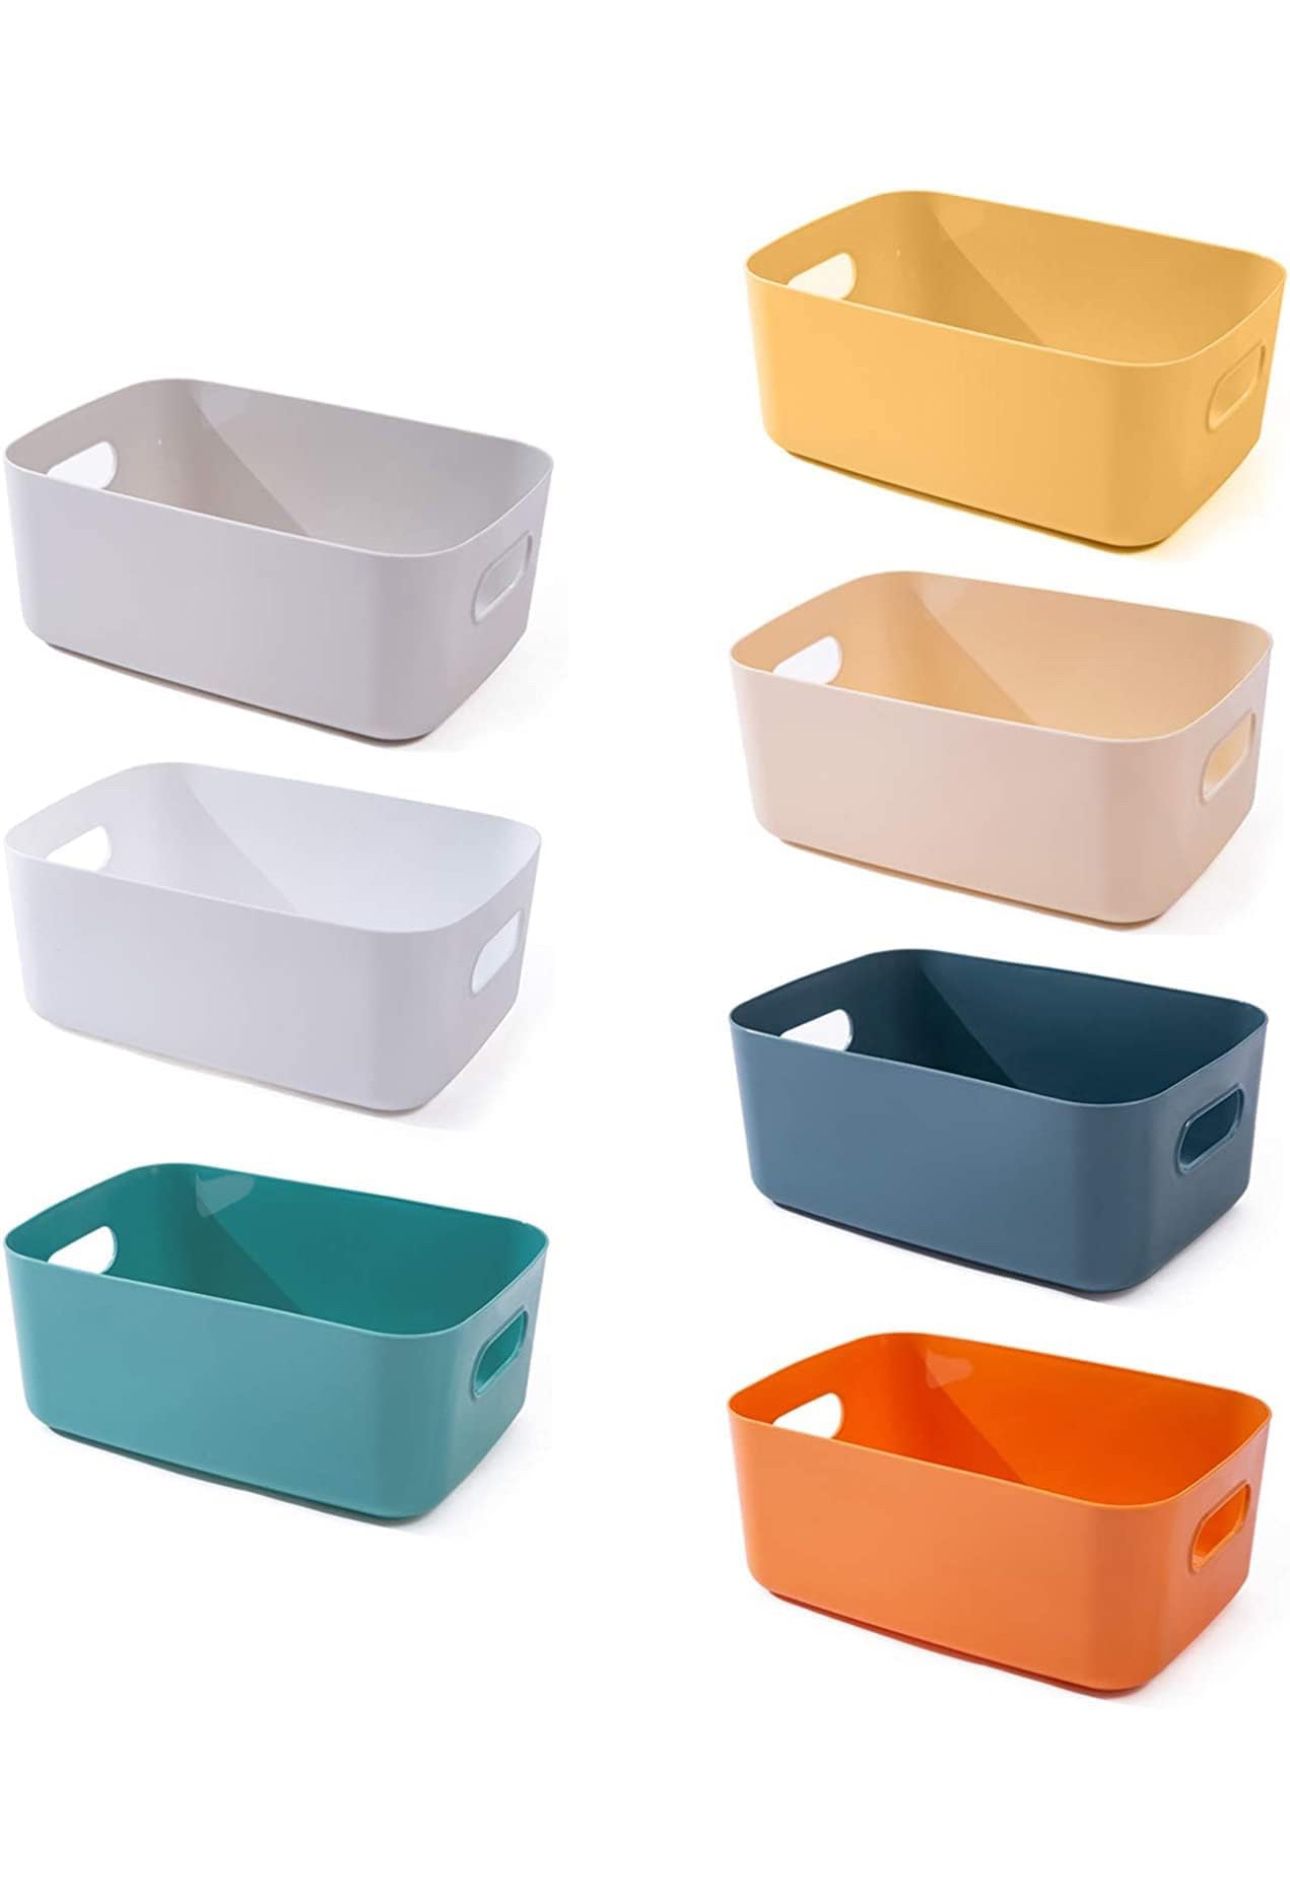 OWill 7-Pack Plastic Storage Bins and Baskets for Efficient Home Classroom Organization - Small Containers in Multiple Colors for Kitchen, Cupboard bo